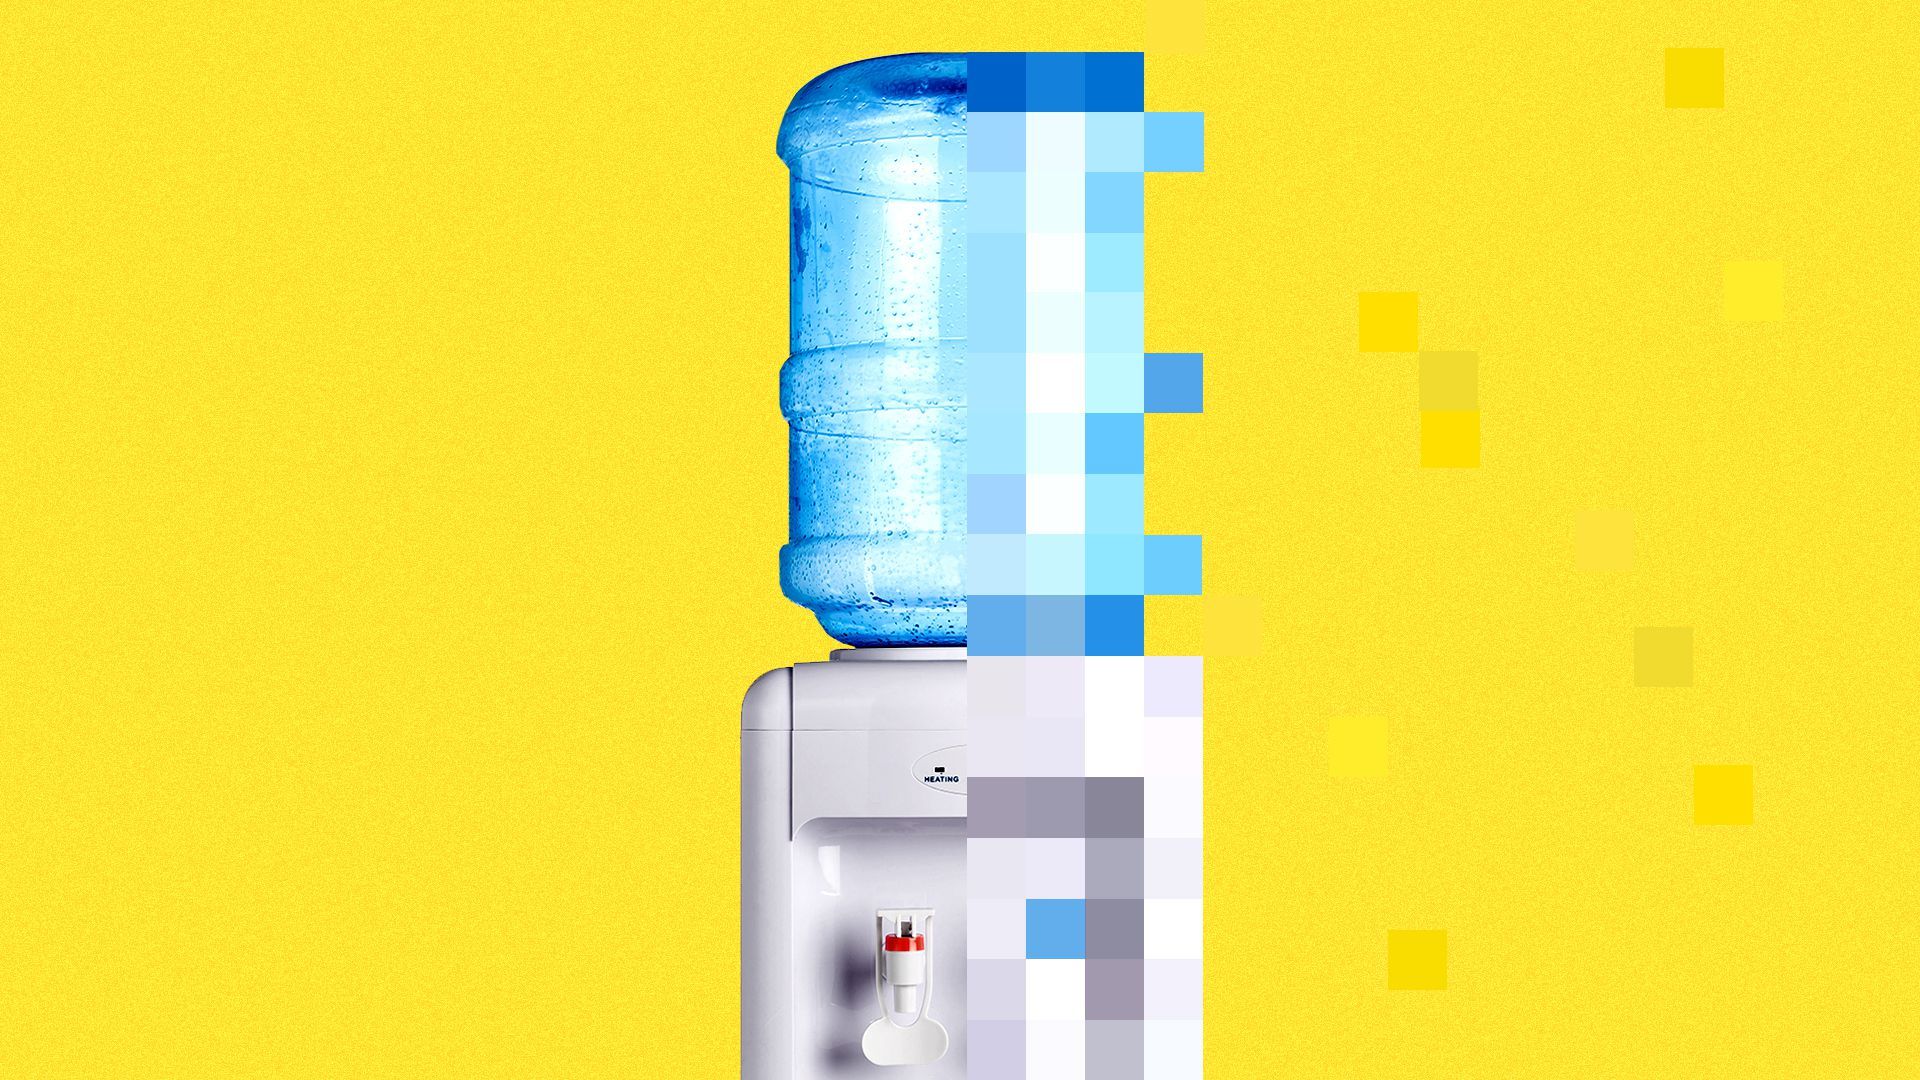 Illustration of an office water cooler becoming pixelated